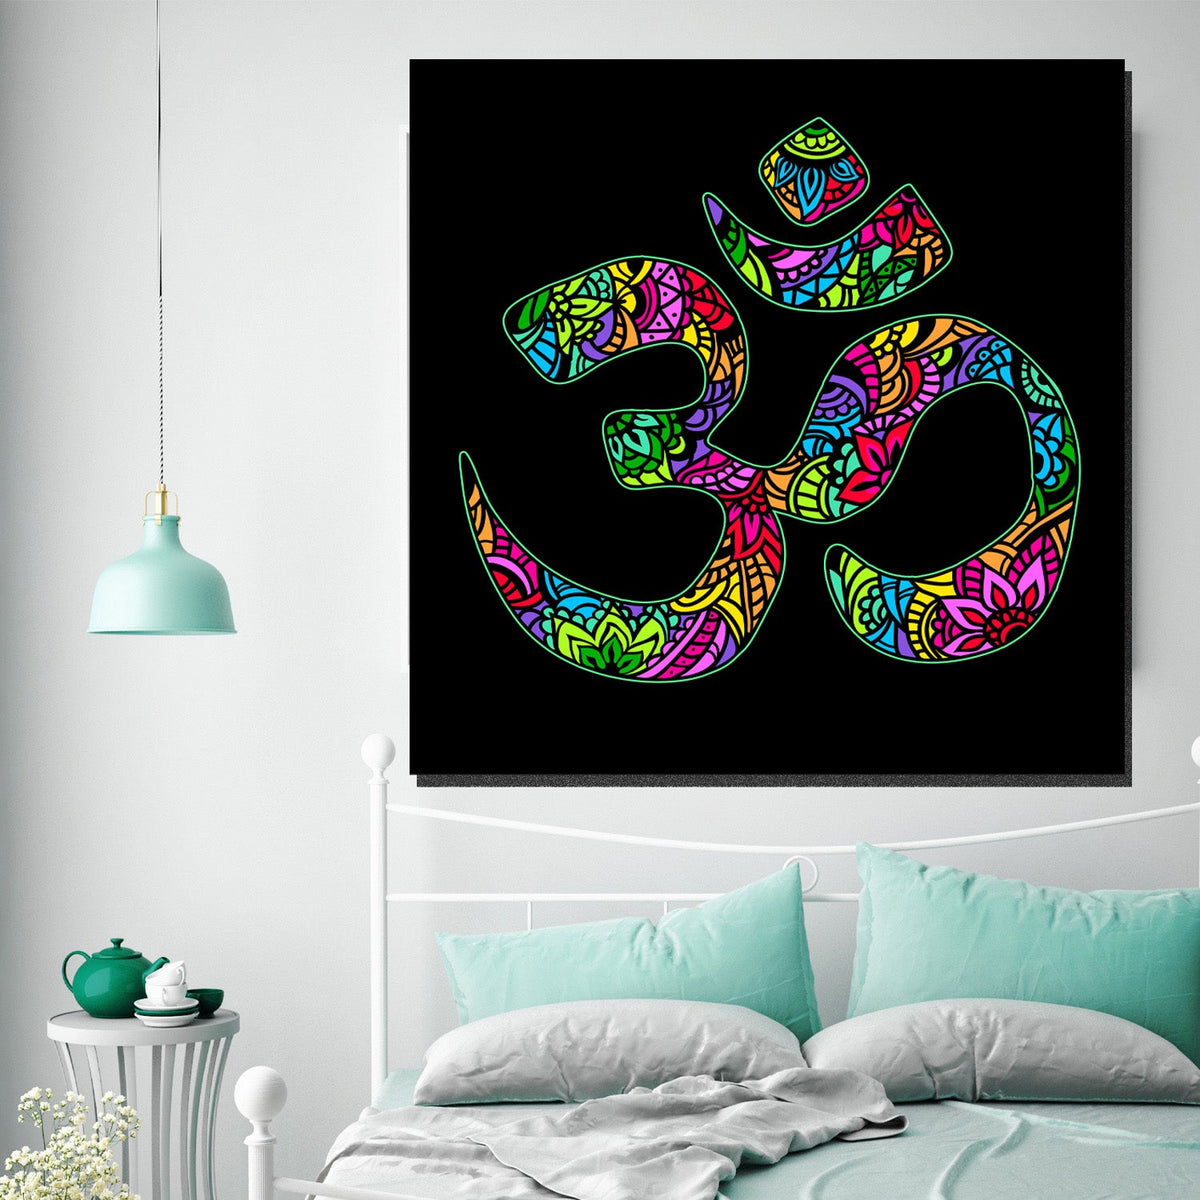 https://cdn.shopify.com/s/files/1/0387/9986/8044/products/ColourfulOmSymbolCanvasArtprintStretched-4.jpg